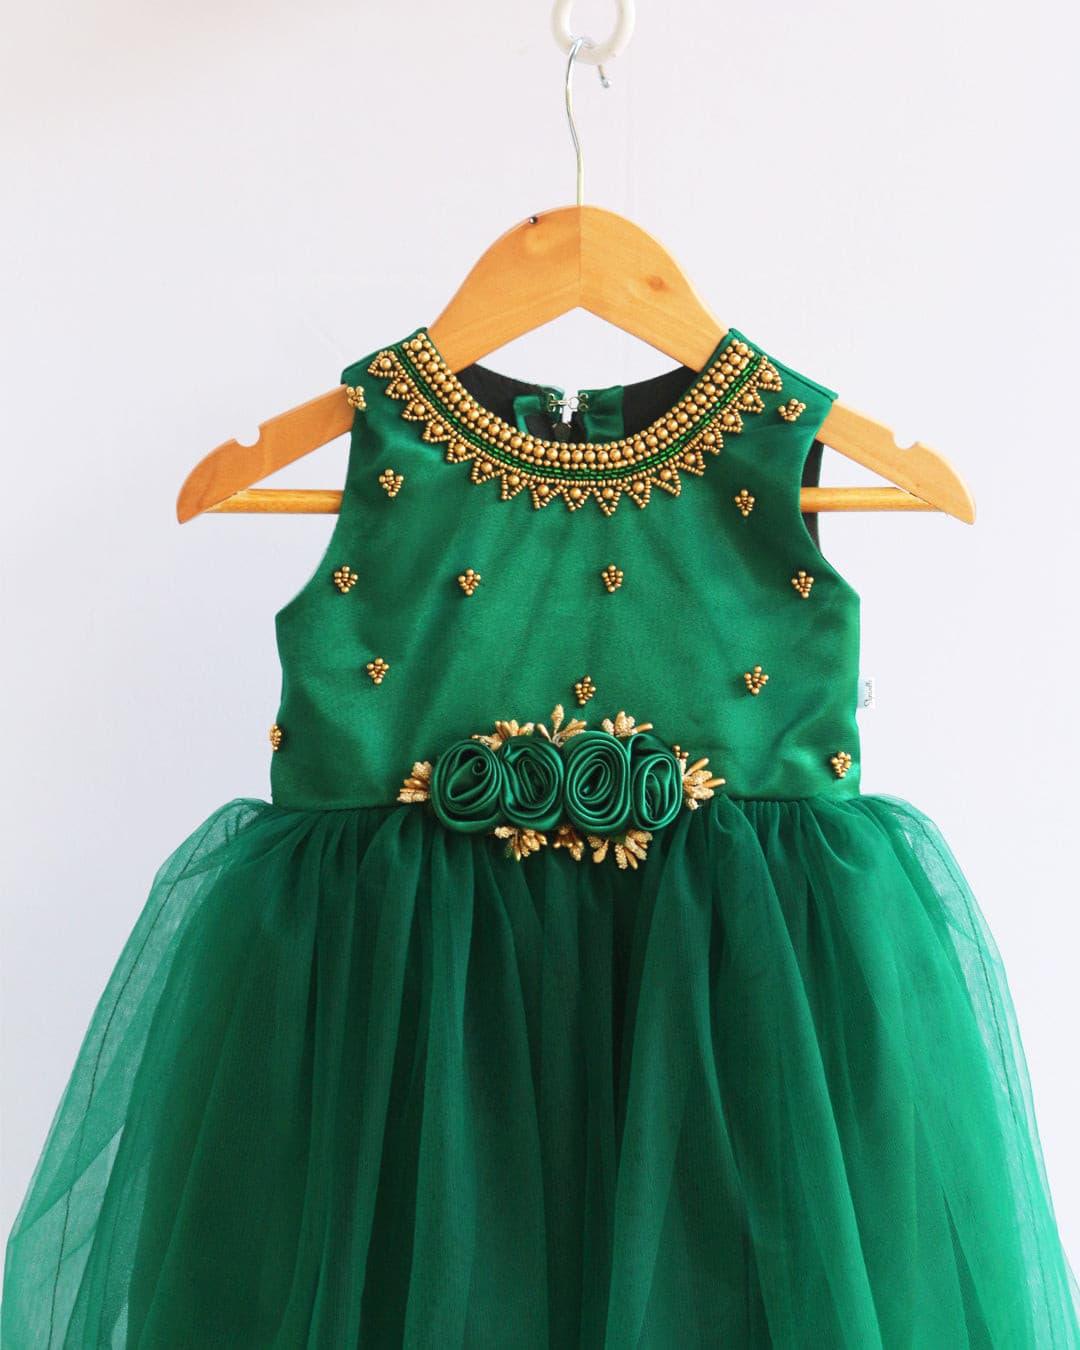 Bottle Green Handwork Sleeveless Knee length Frock
Material: Bottle green nylon mono net with handwork on neck and yoke side. Premium matching colour ultra satin is used as lining. Inner portion is covered with prem